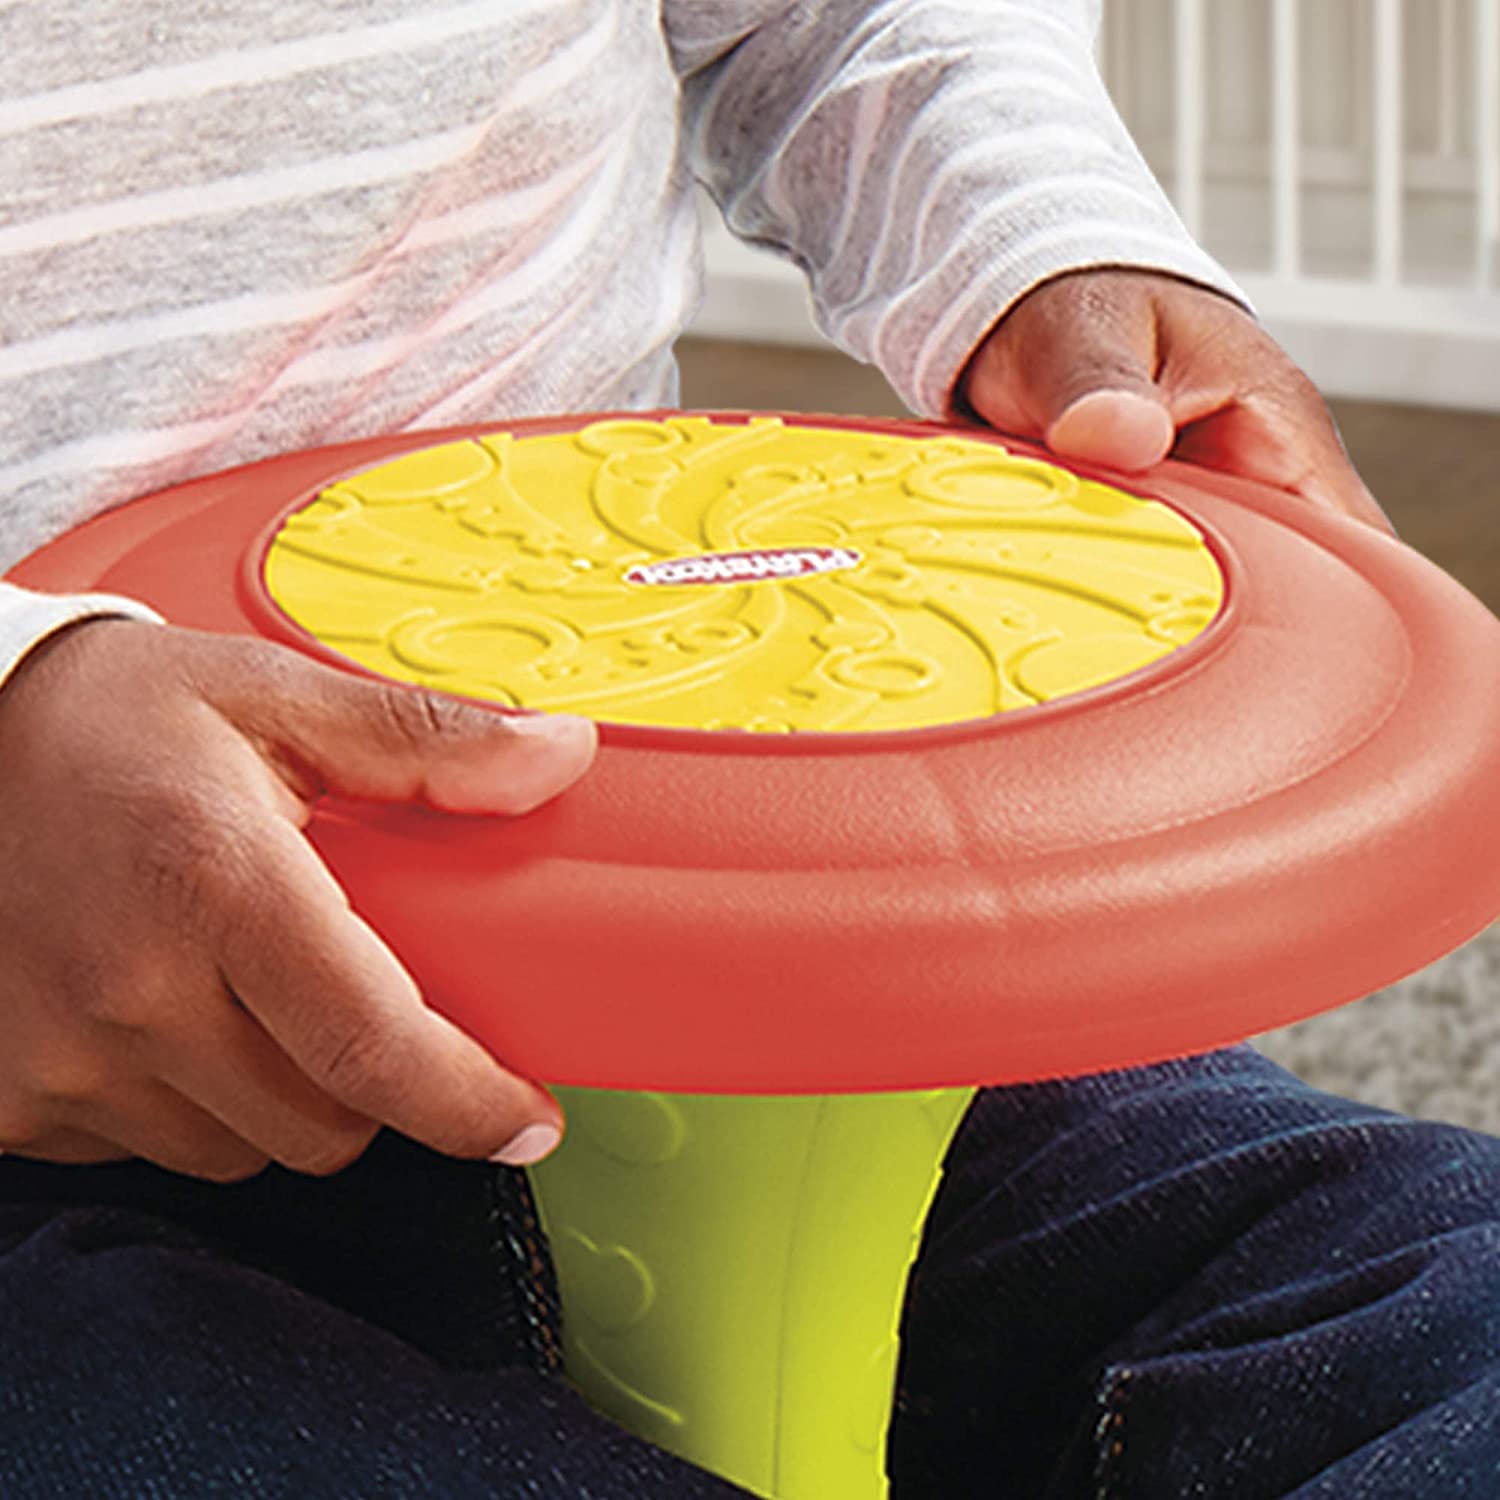 Playskool Sit n Spin Classic Spinning Activity Toy for Toddlers Ages Over 18 Months - image 3 of 5